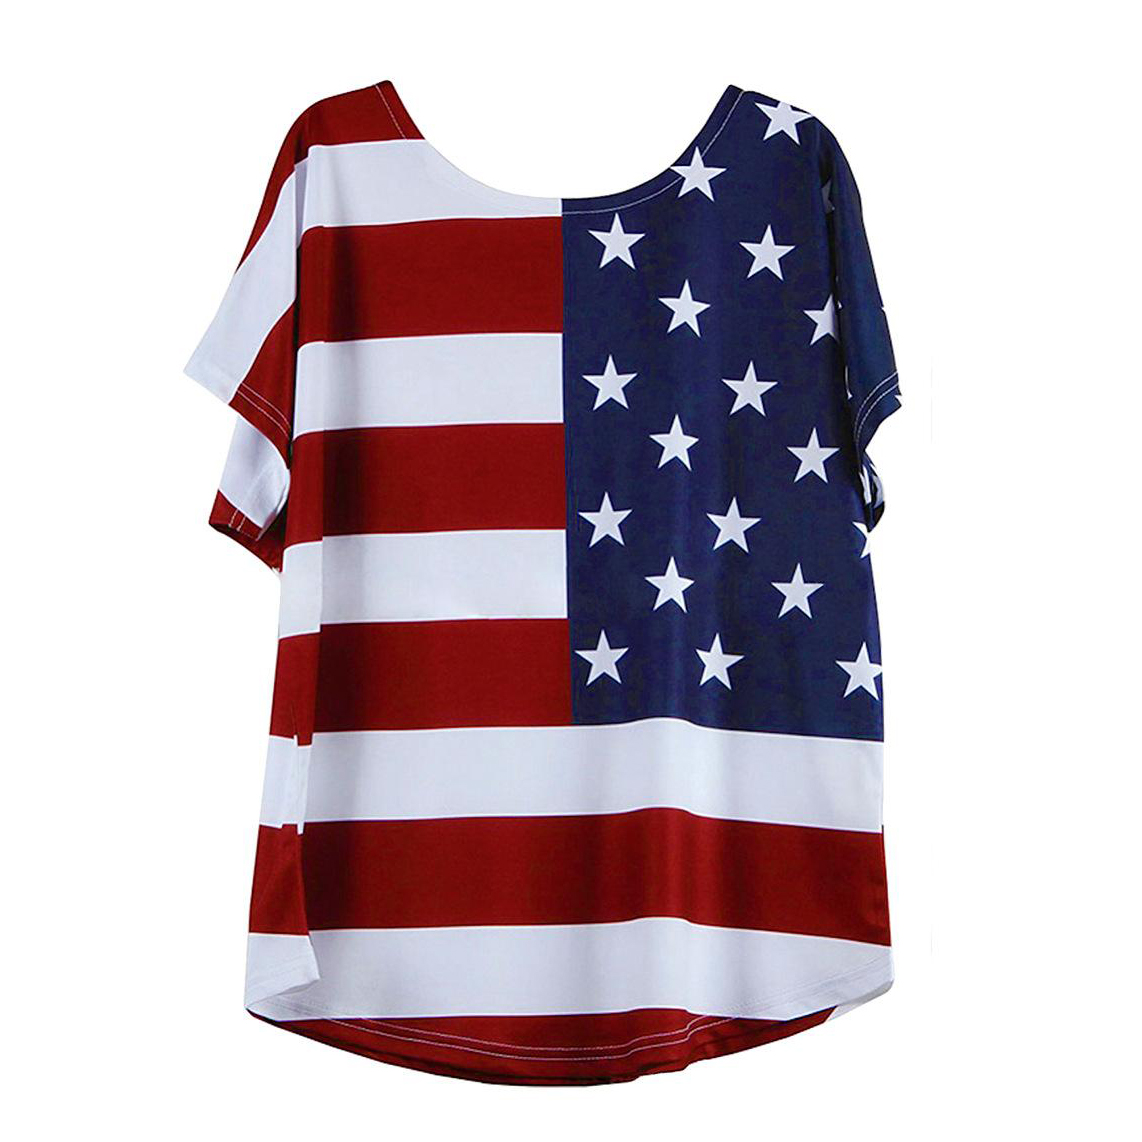 Personlized Products Sublimation On Black Shirts - american flag printed short sleeves uk flag t shirt – Gift